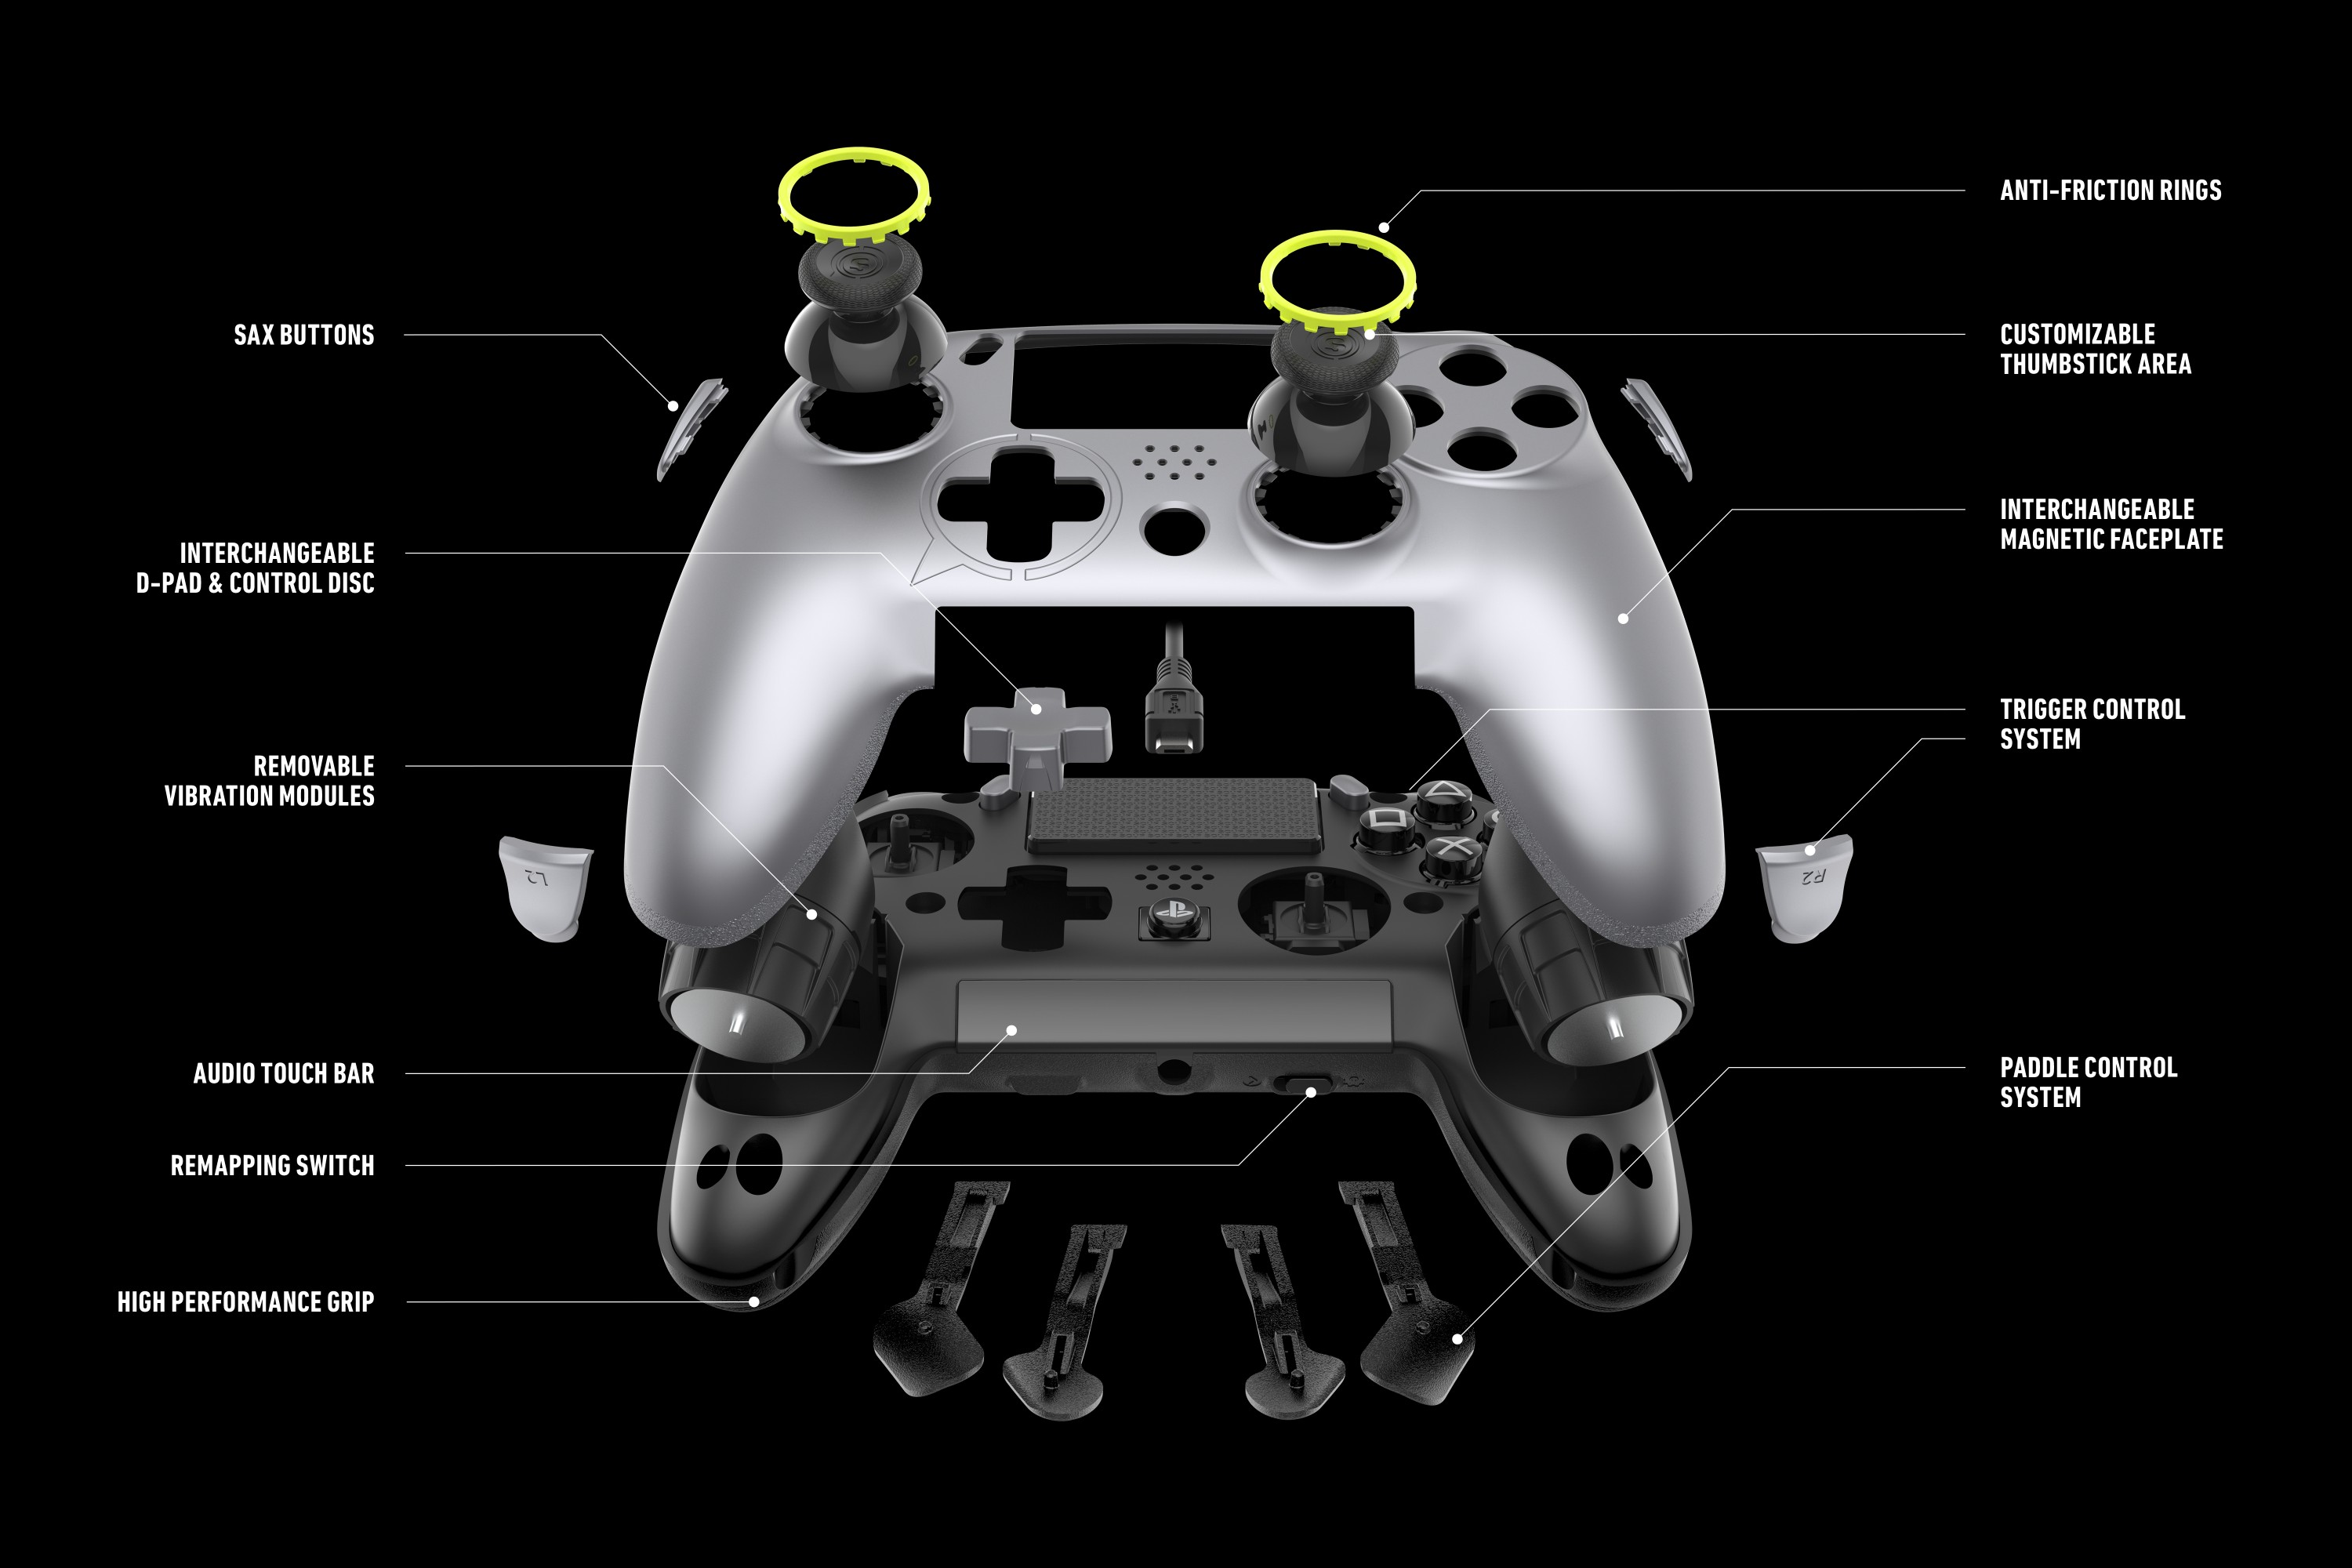 Scuf's Vantage Controller Will Bring The Elite Treatment To PS4